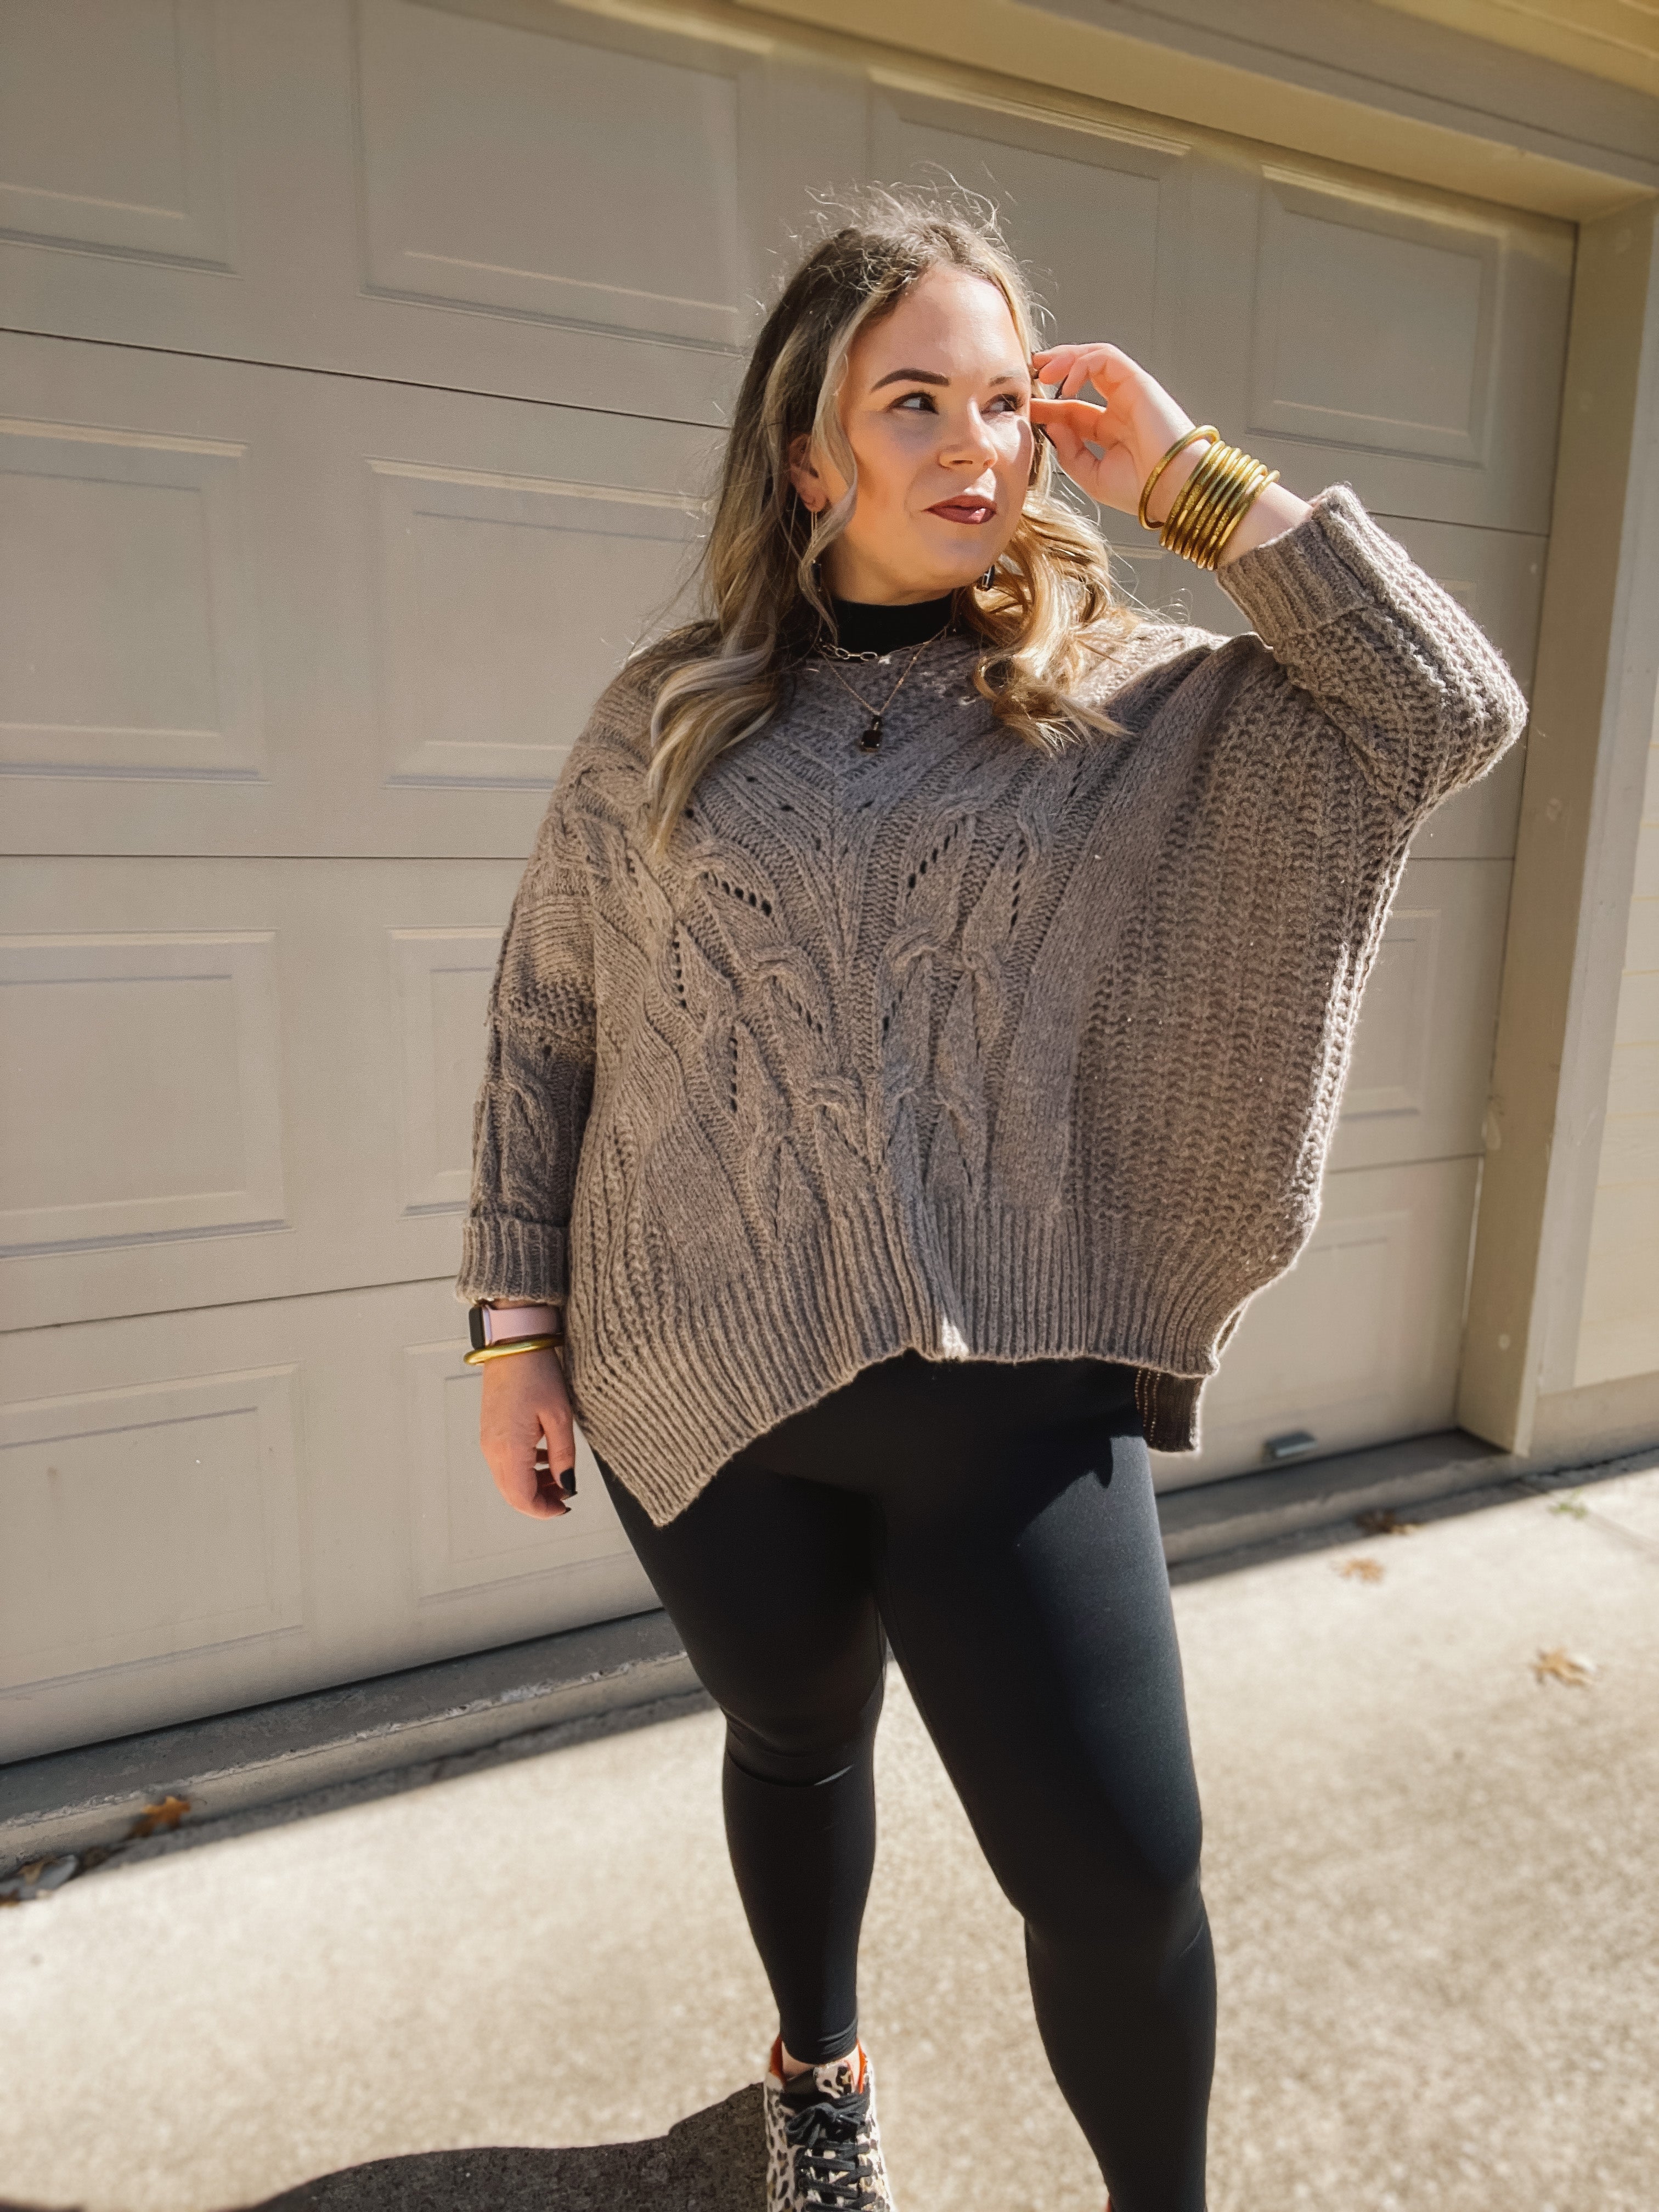 Crisp Morning Air Oversized Dolman 3/4 Sleeve Sweater in Stone Grey - Giddy Up Glamour Boutique